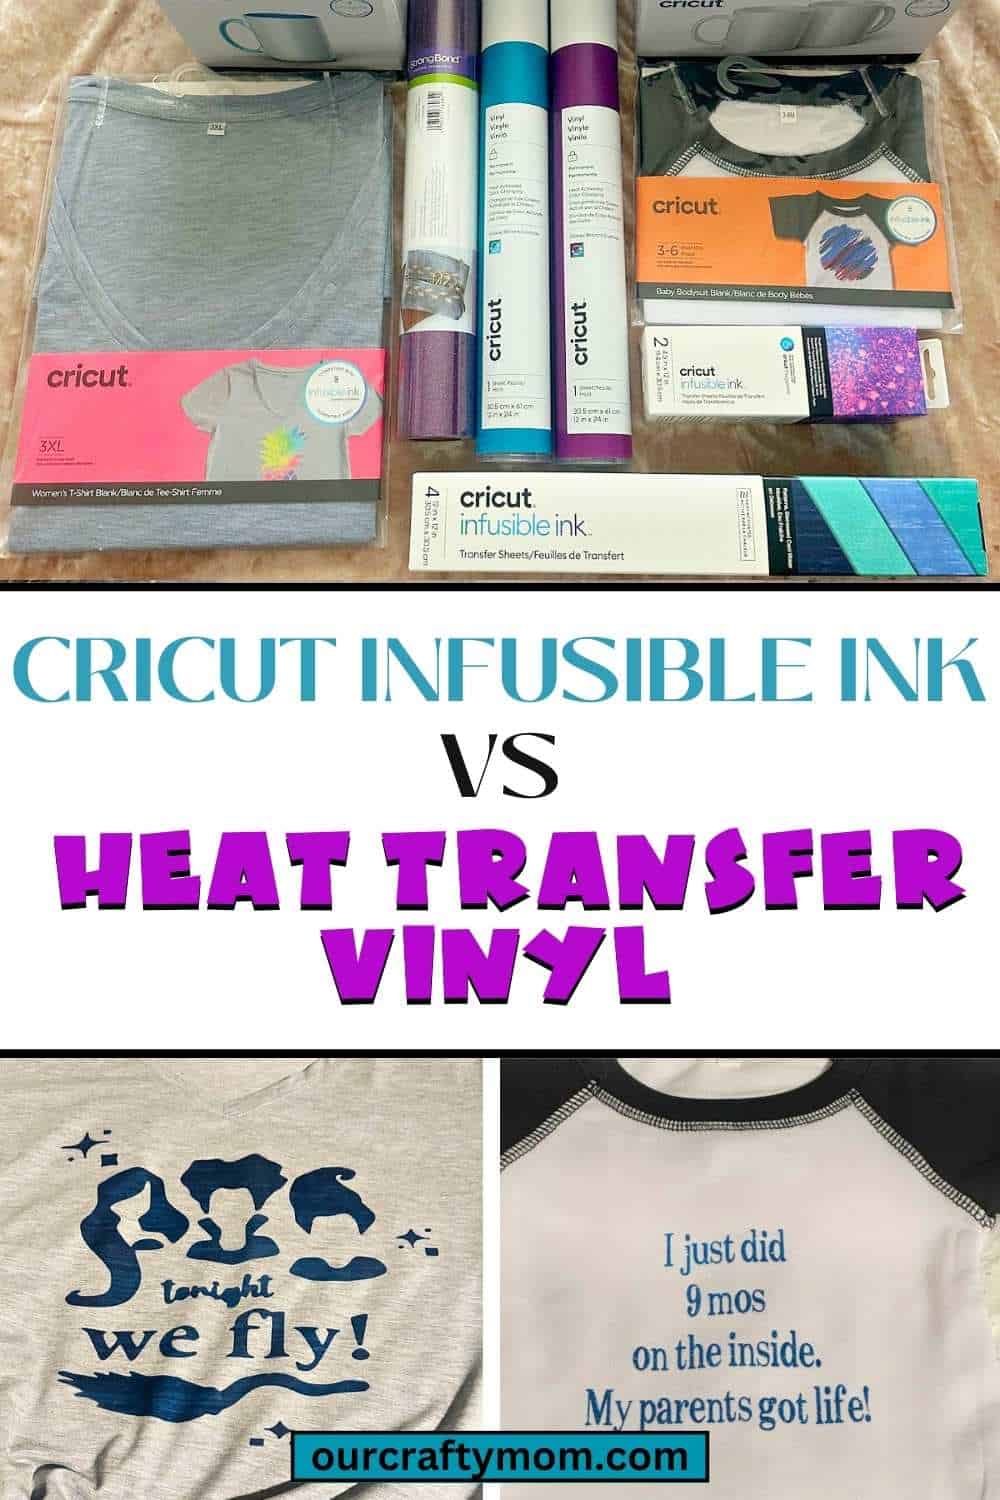 What Should I Use ~ Infusible Ink or HTV? - Fun Stuff Crafts